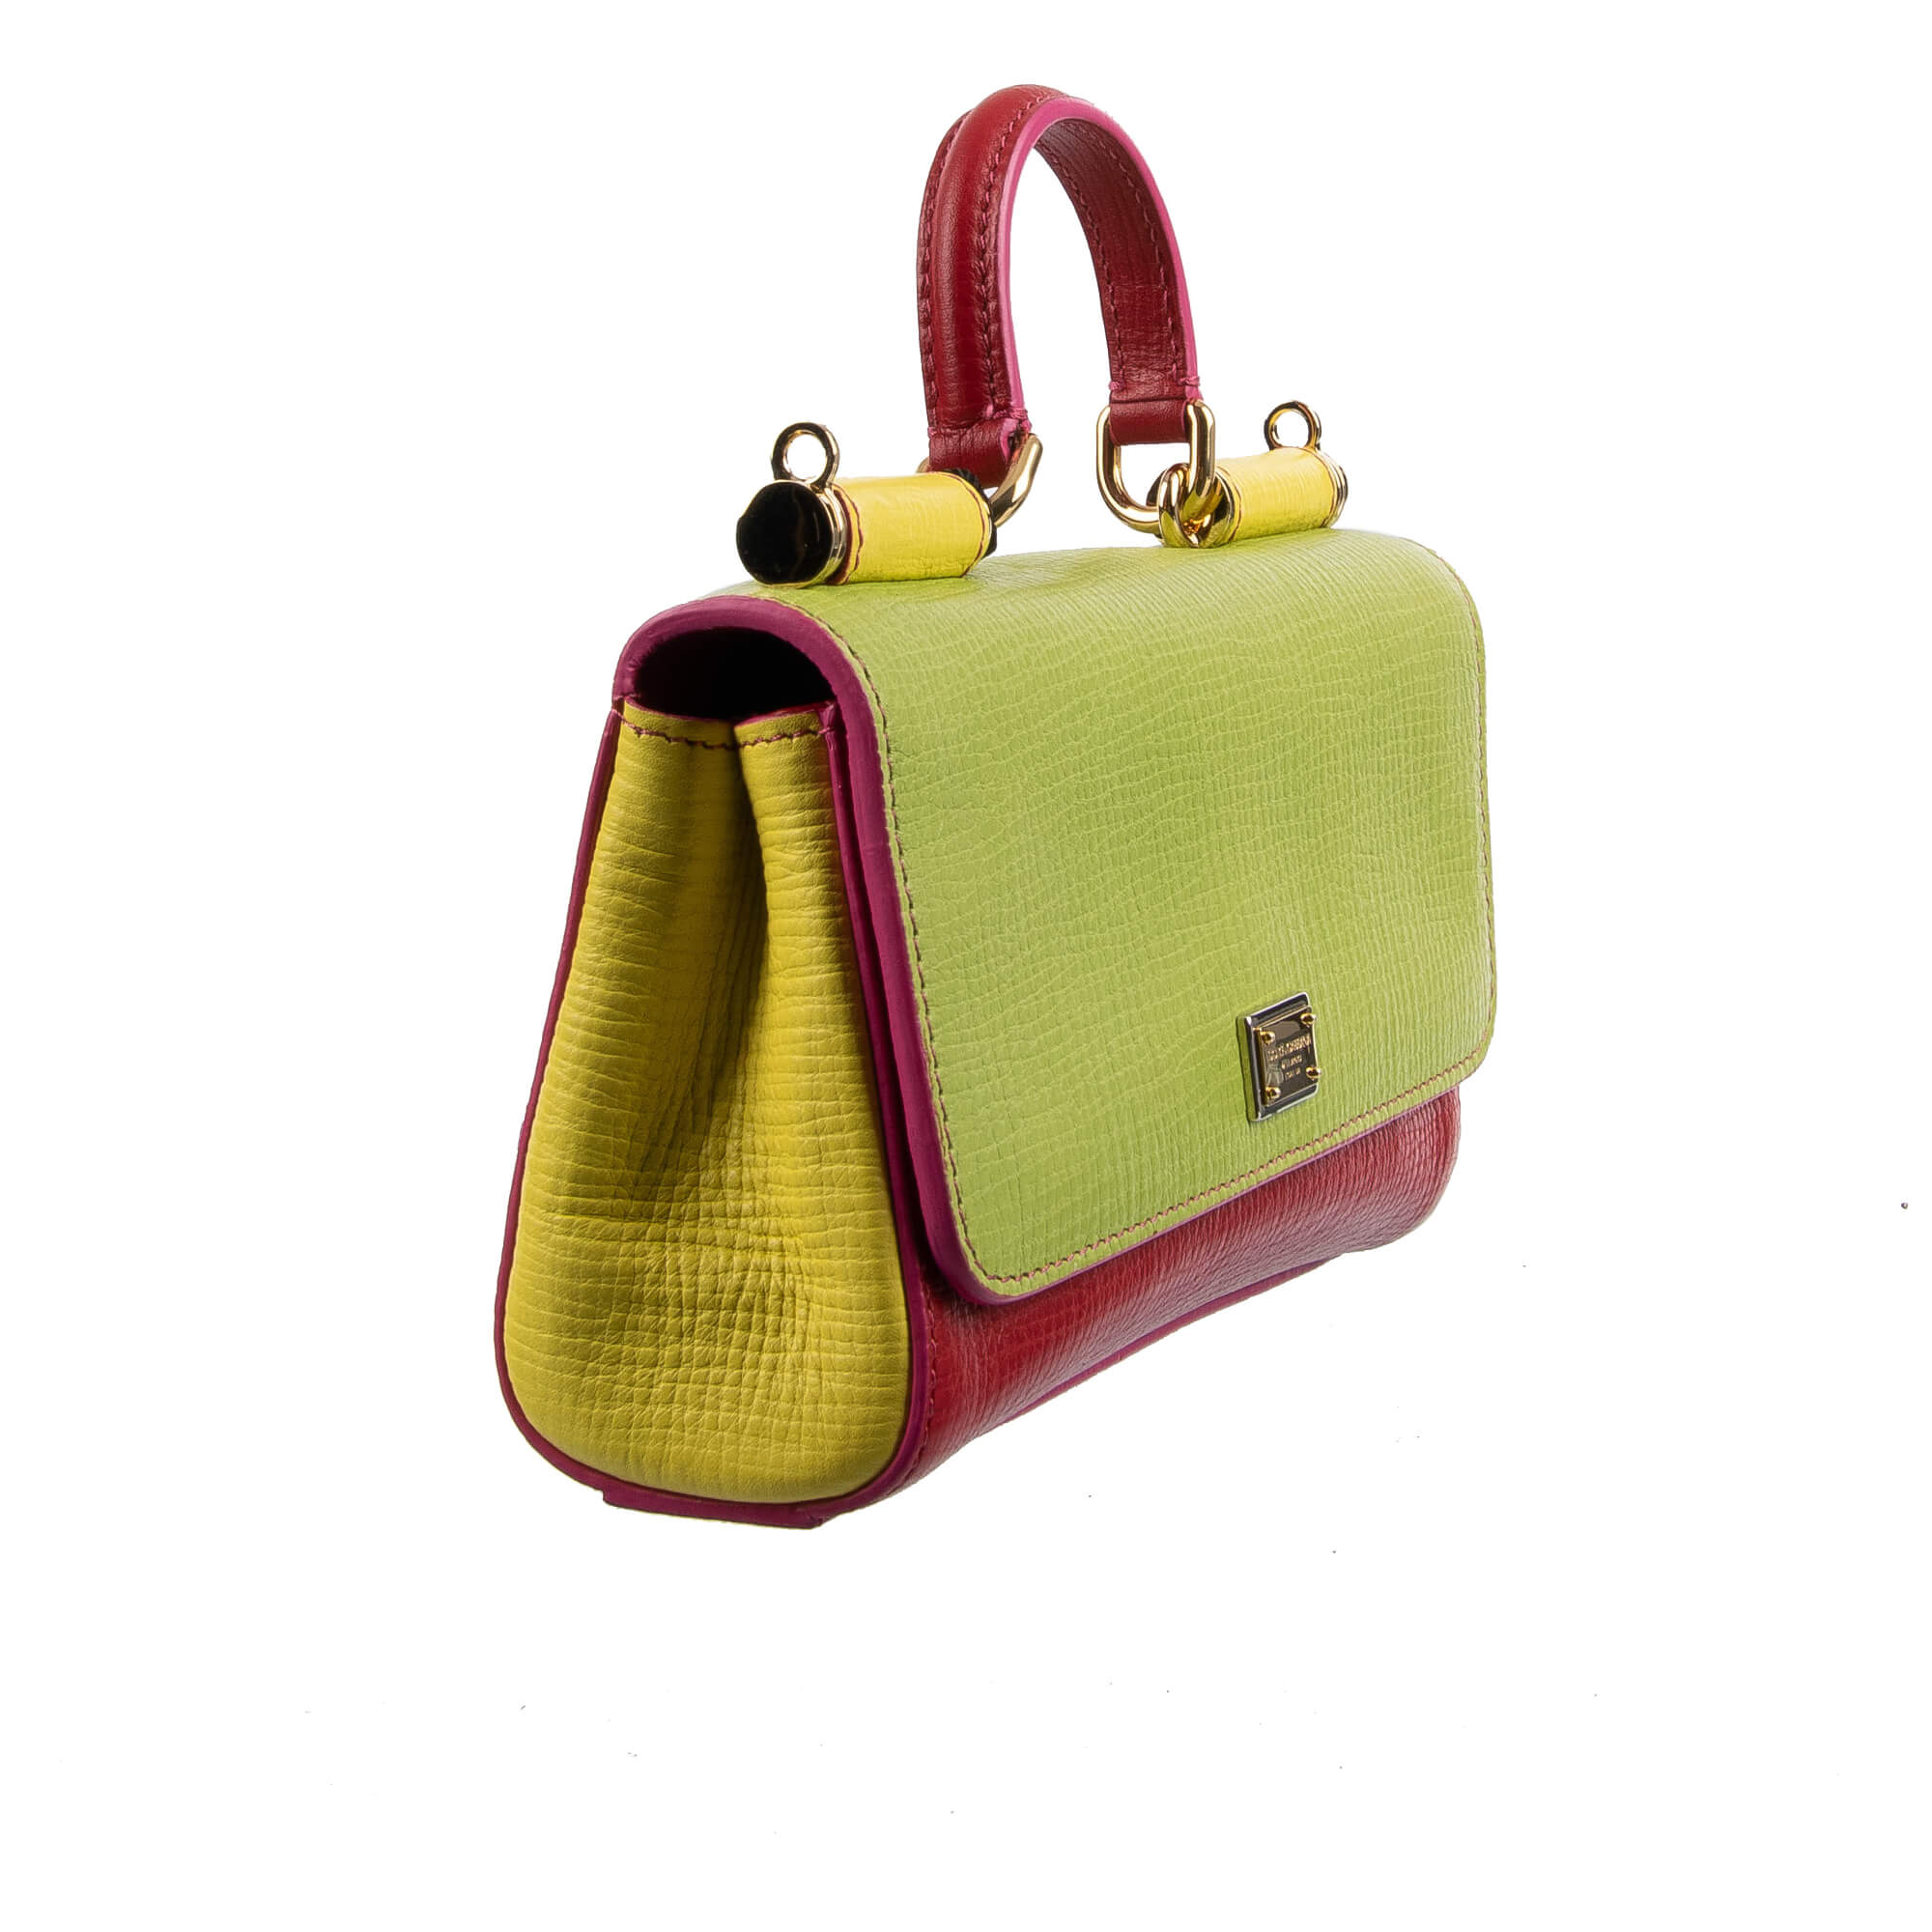 Dolce & Gabbana Leather Bag MISS SICILY Mini Green Red | FASHION ROOMS